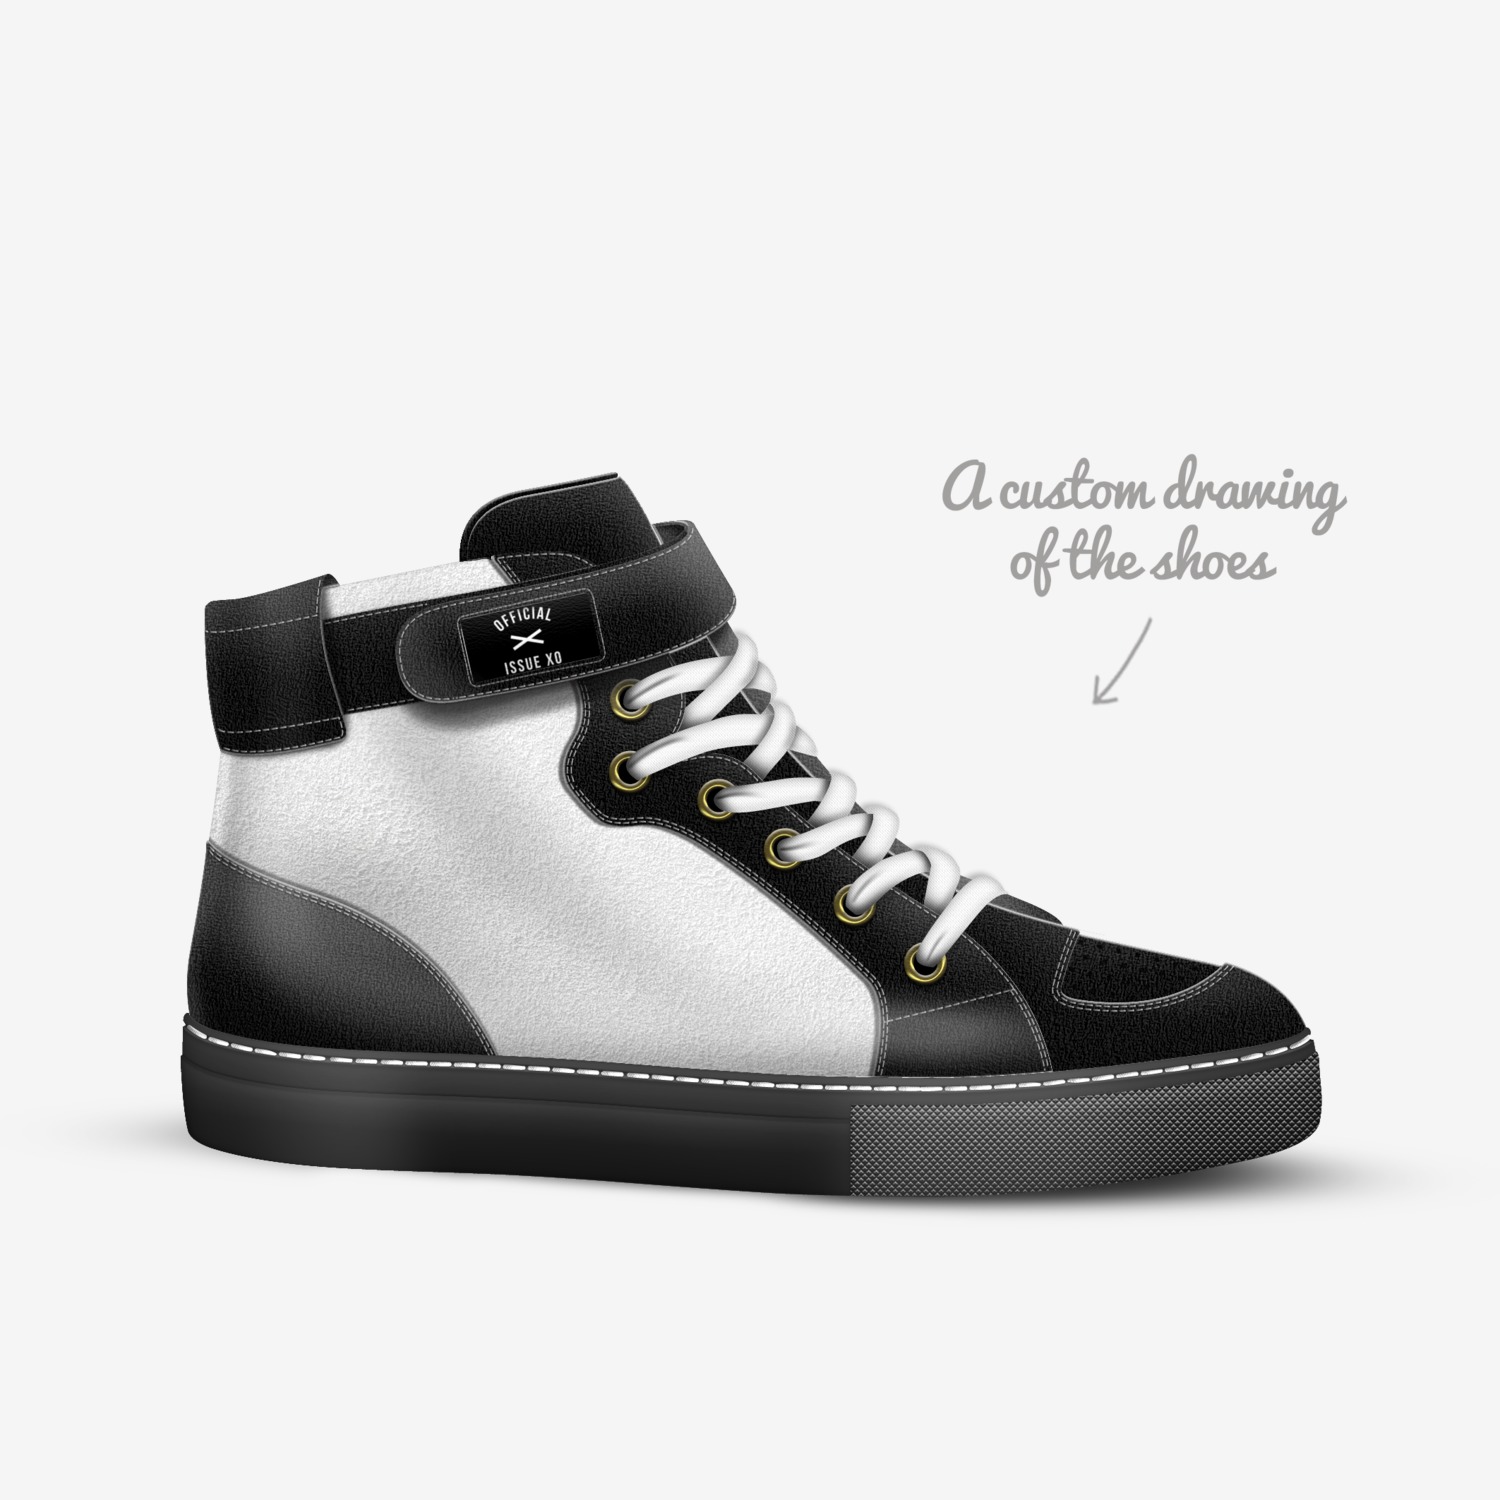 The Weeknd Shoes A Custom Shoe concept by Rebel Willams